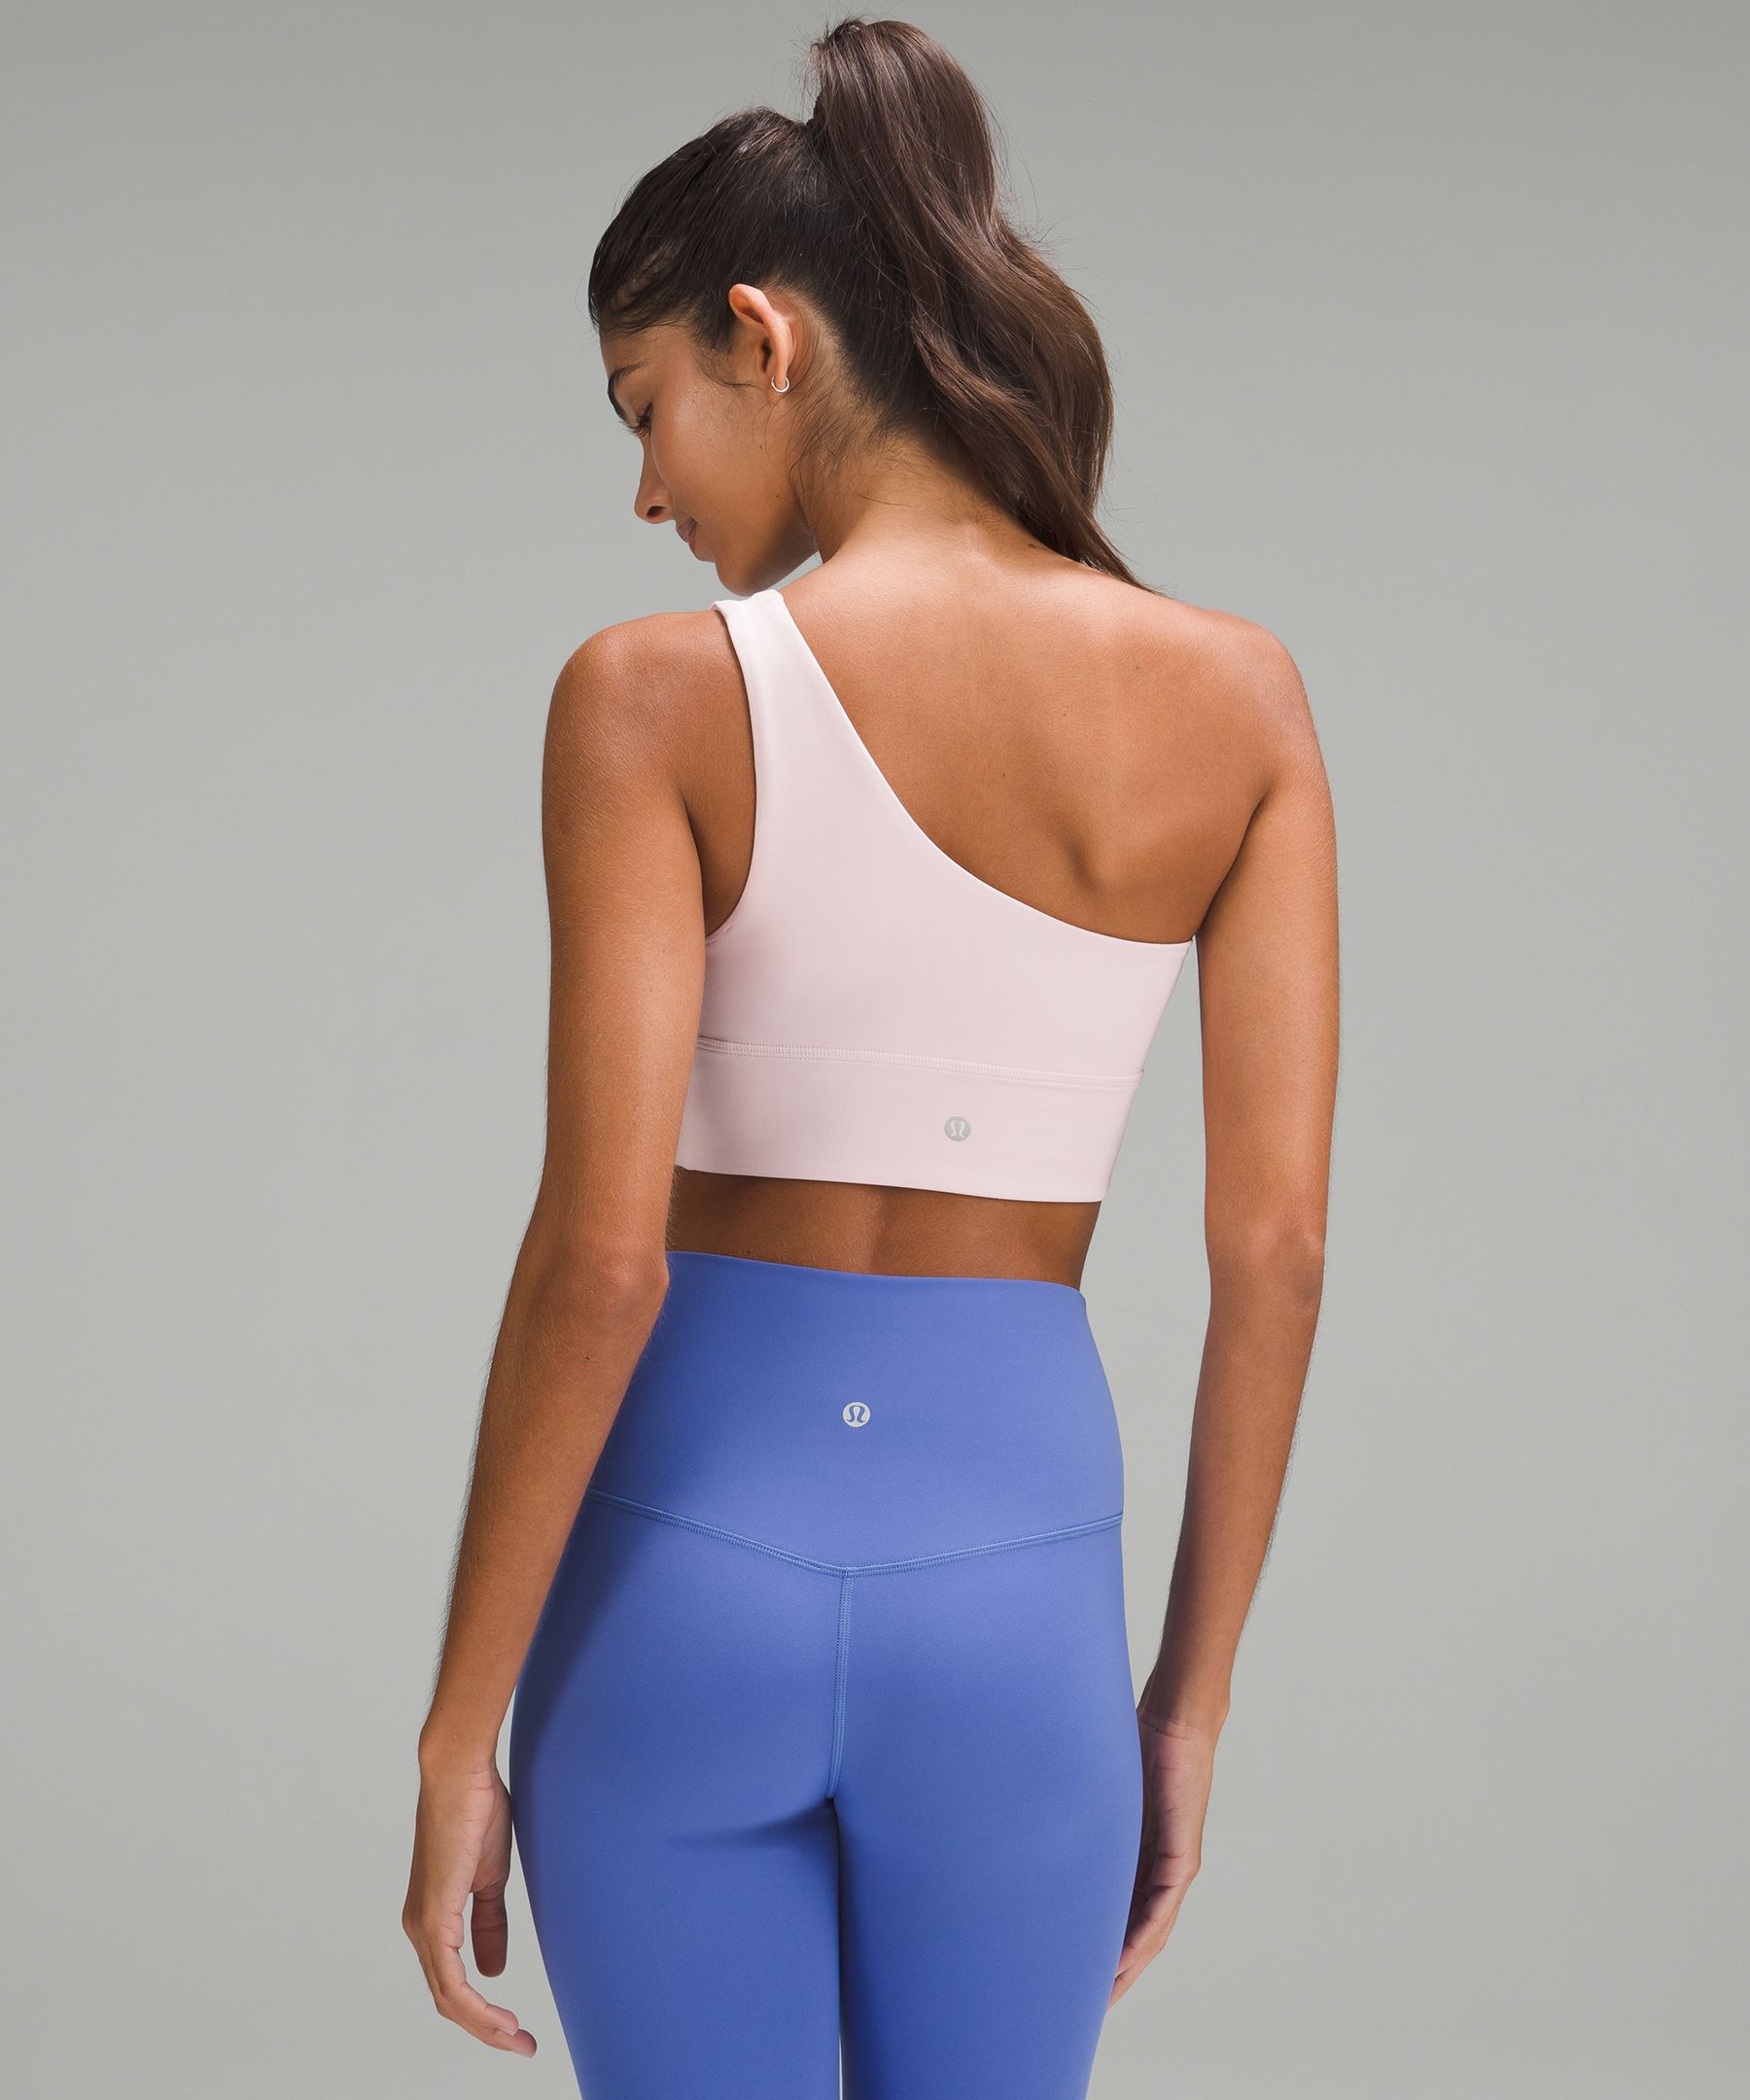 Lululemon Ribbed Nulu Asymmetrical Yoga Bra Pink - $45 (25% Off Retail) New  With Tags - From Sofia